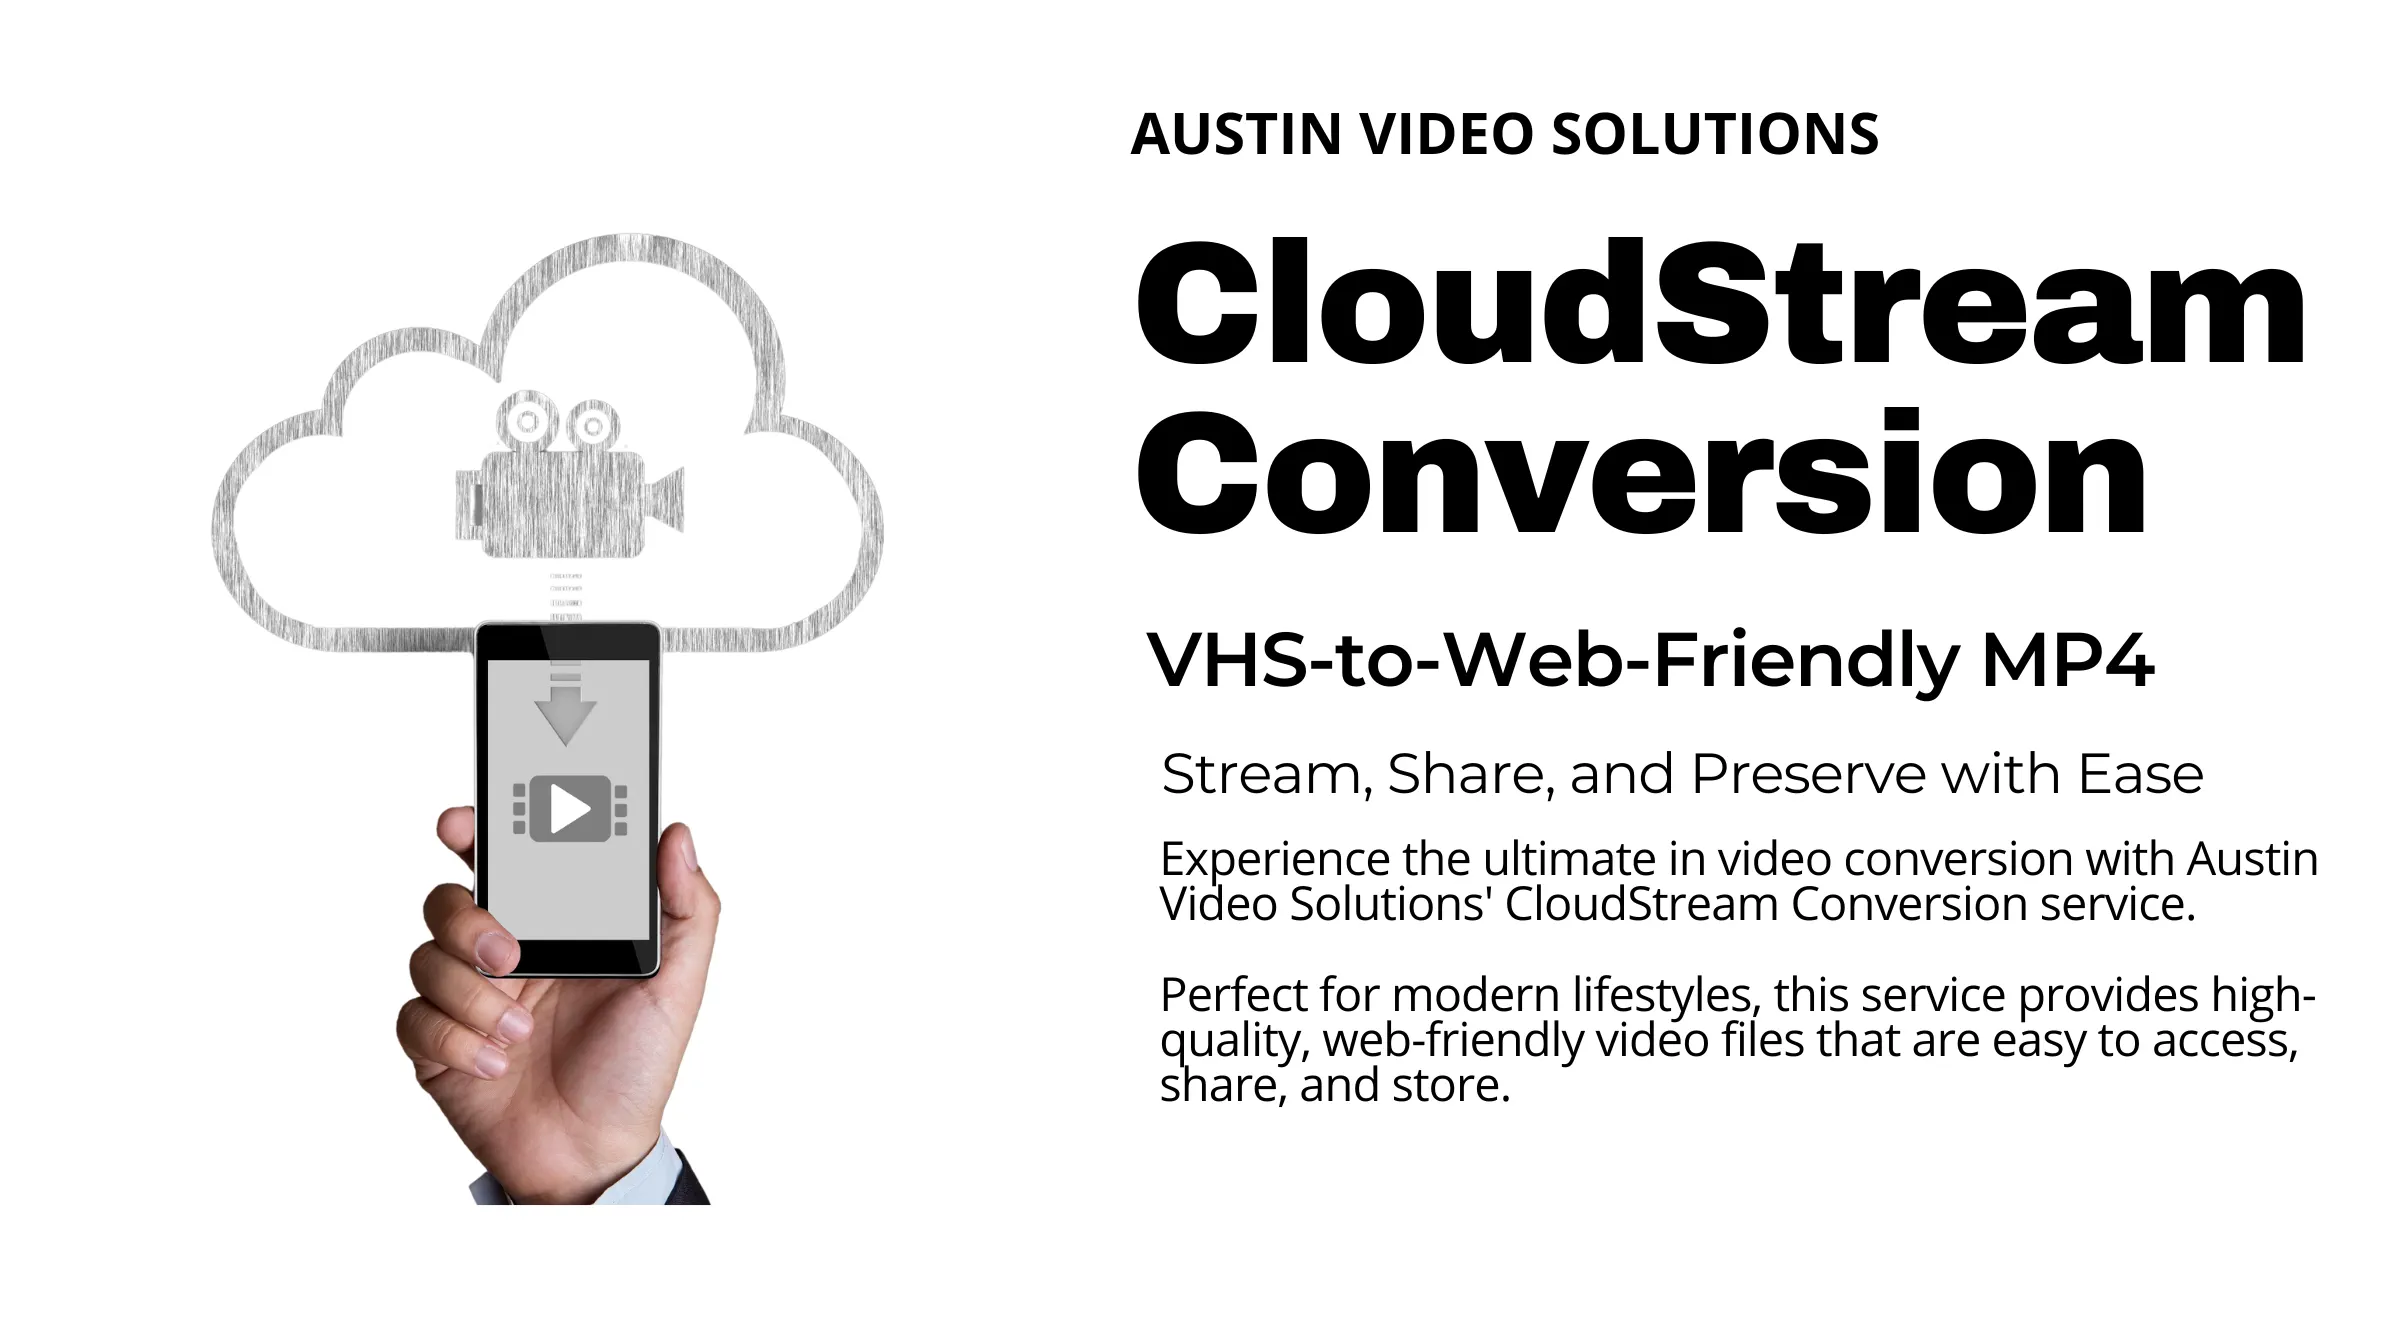 Your cherished memories, safely and securely converted from VHS to digital format with Austin Video Solutions.</p>
<p>